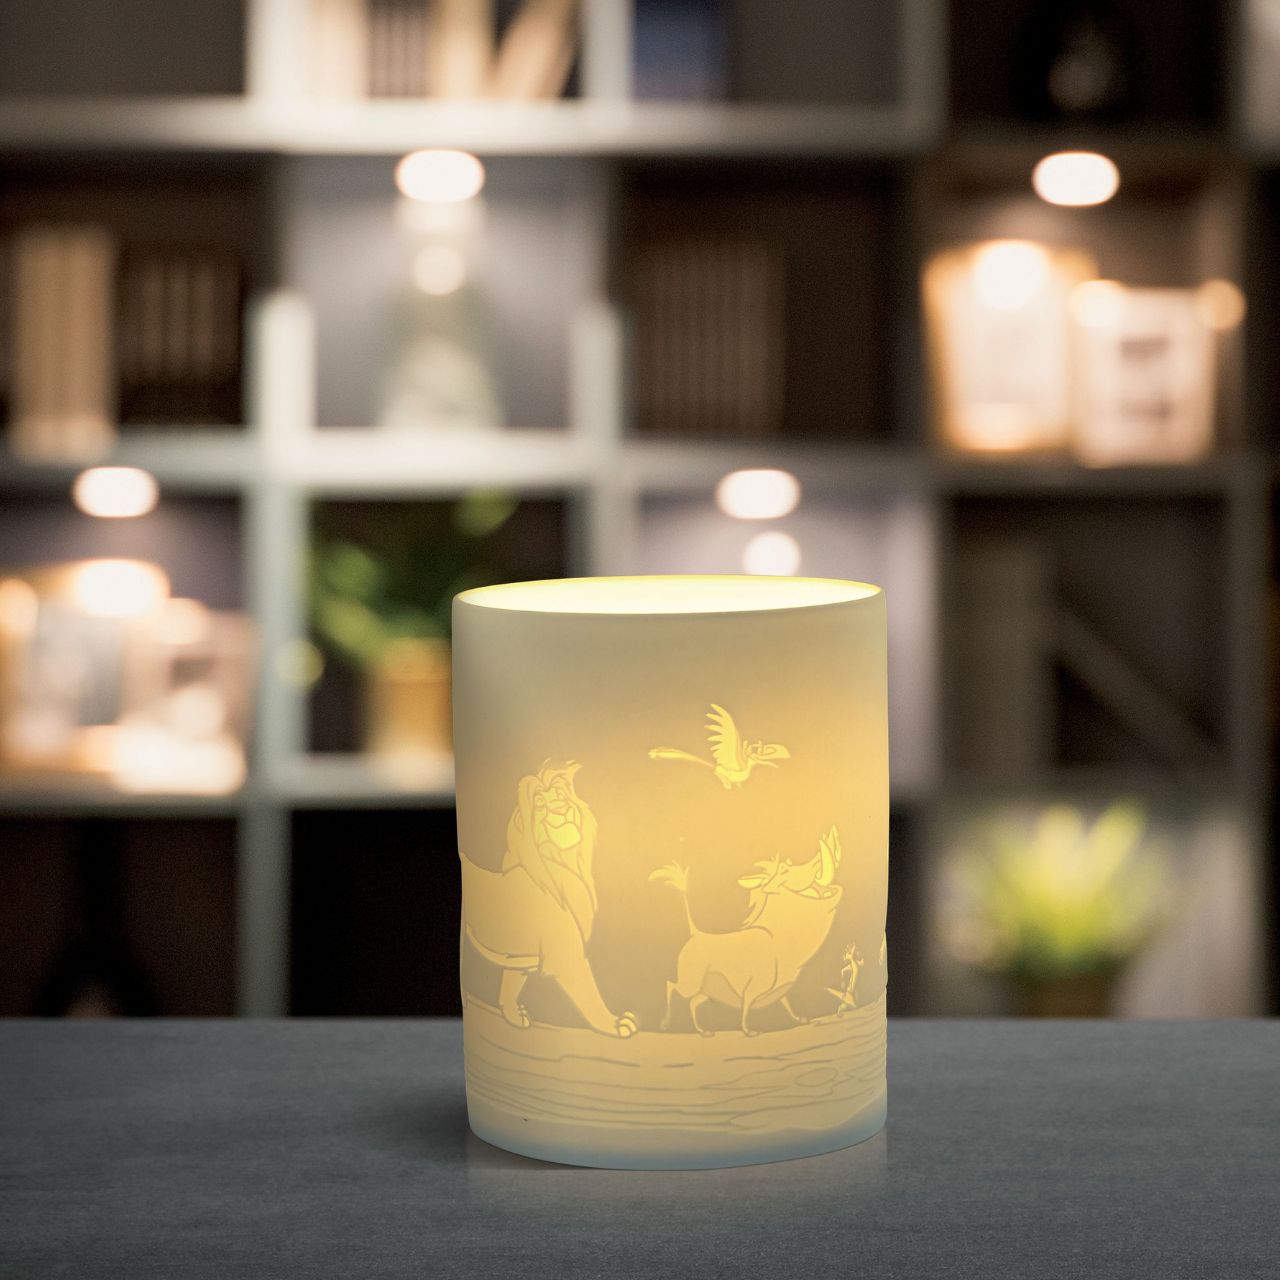 Simba, Timon, Pumba and Zazu will seem as if they are growing up right before your eyes when you light the LED candle, and as they flicker across your room. The Lion King characters are etched into the thin translucent porcelain which radiates a warm night light.